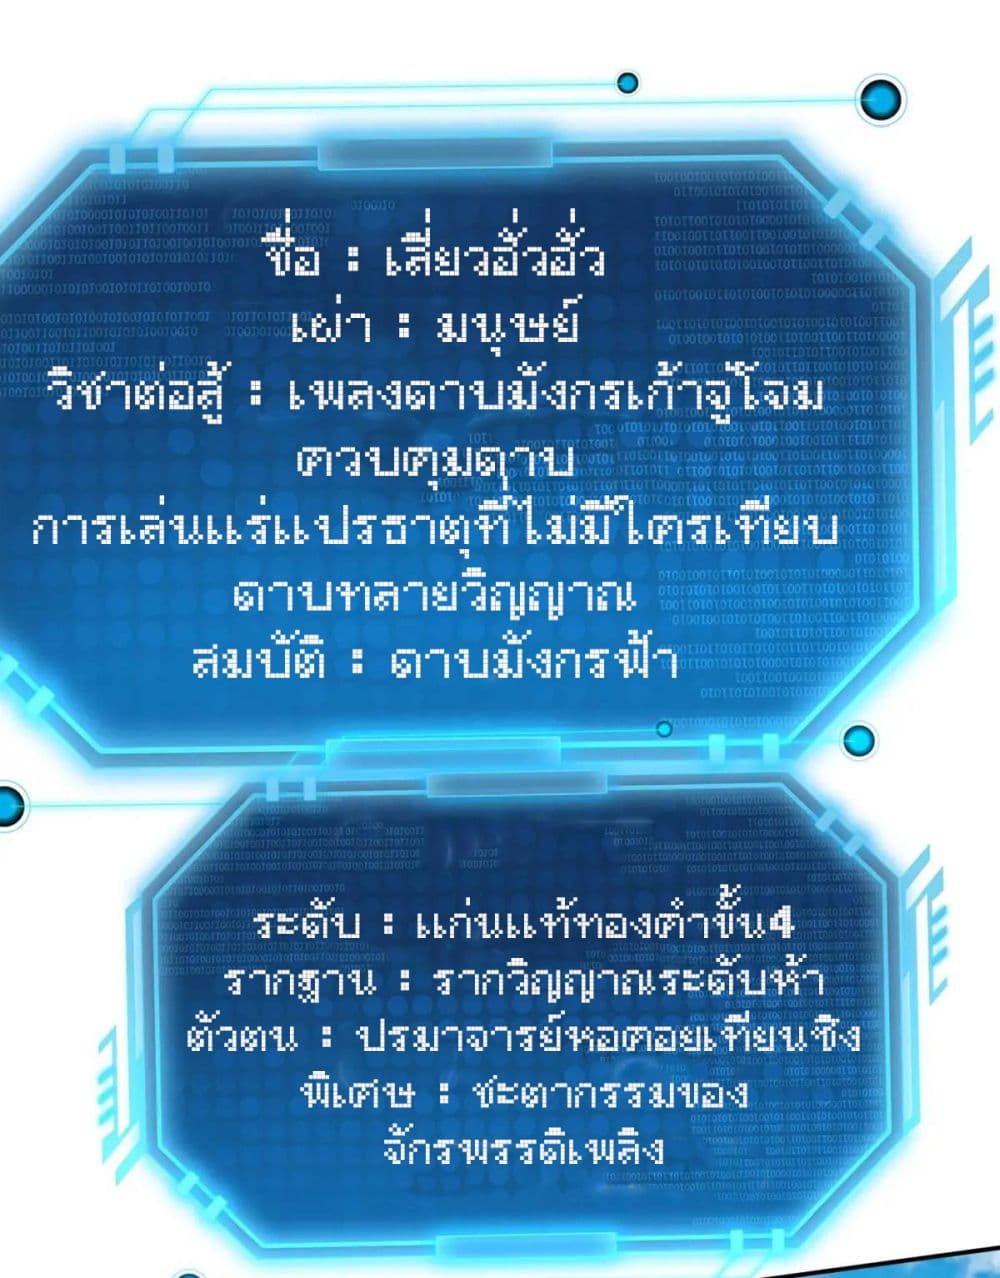 When The System Opens After The Age Of 100 ตอนที่ 18 (3)